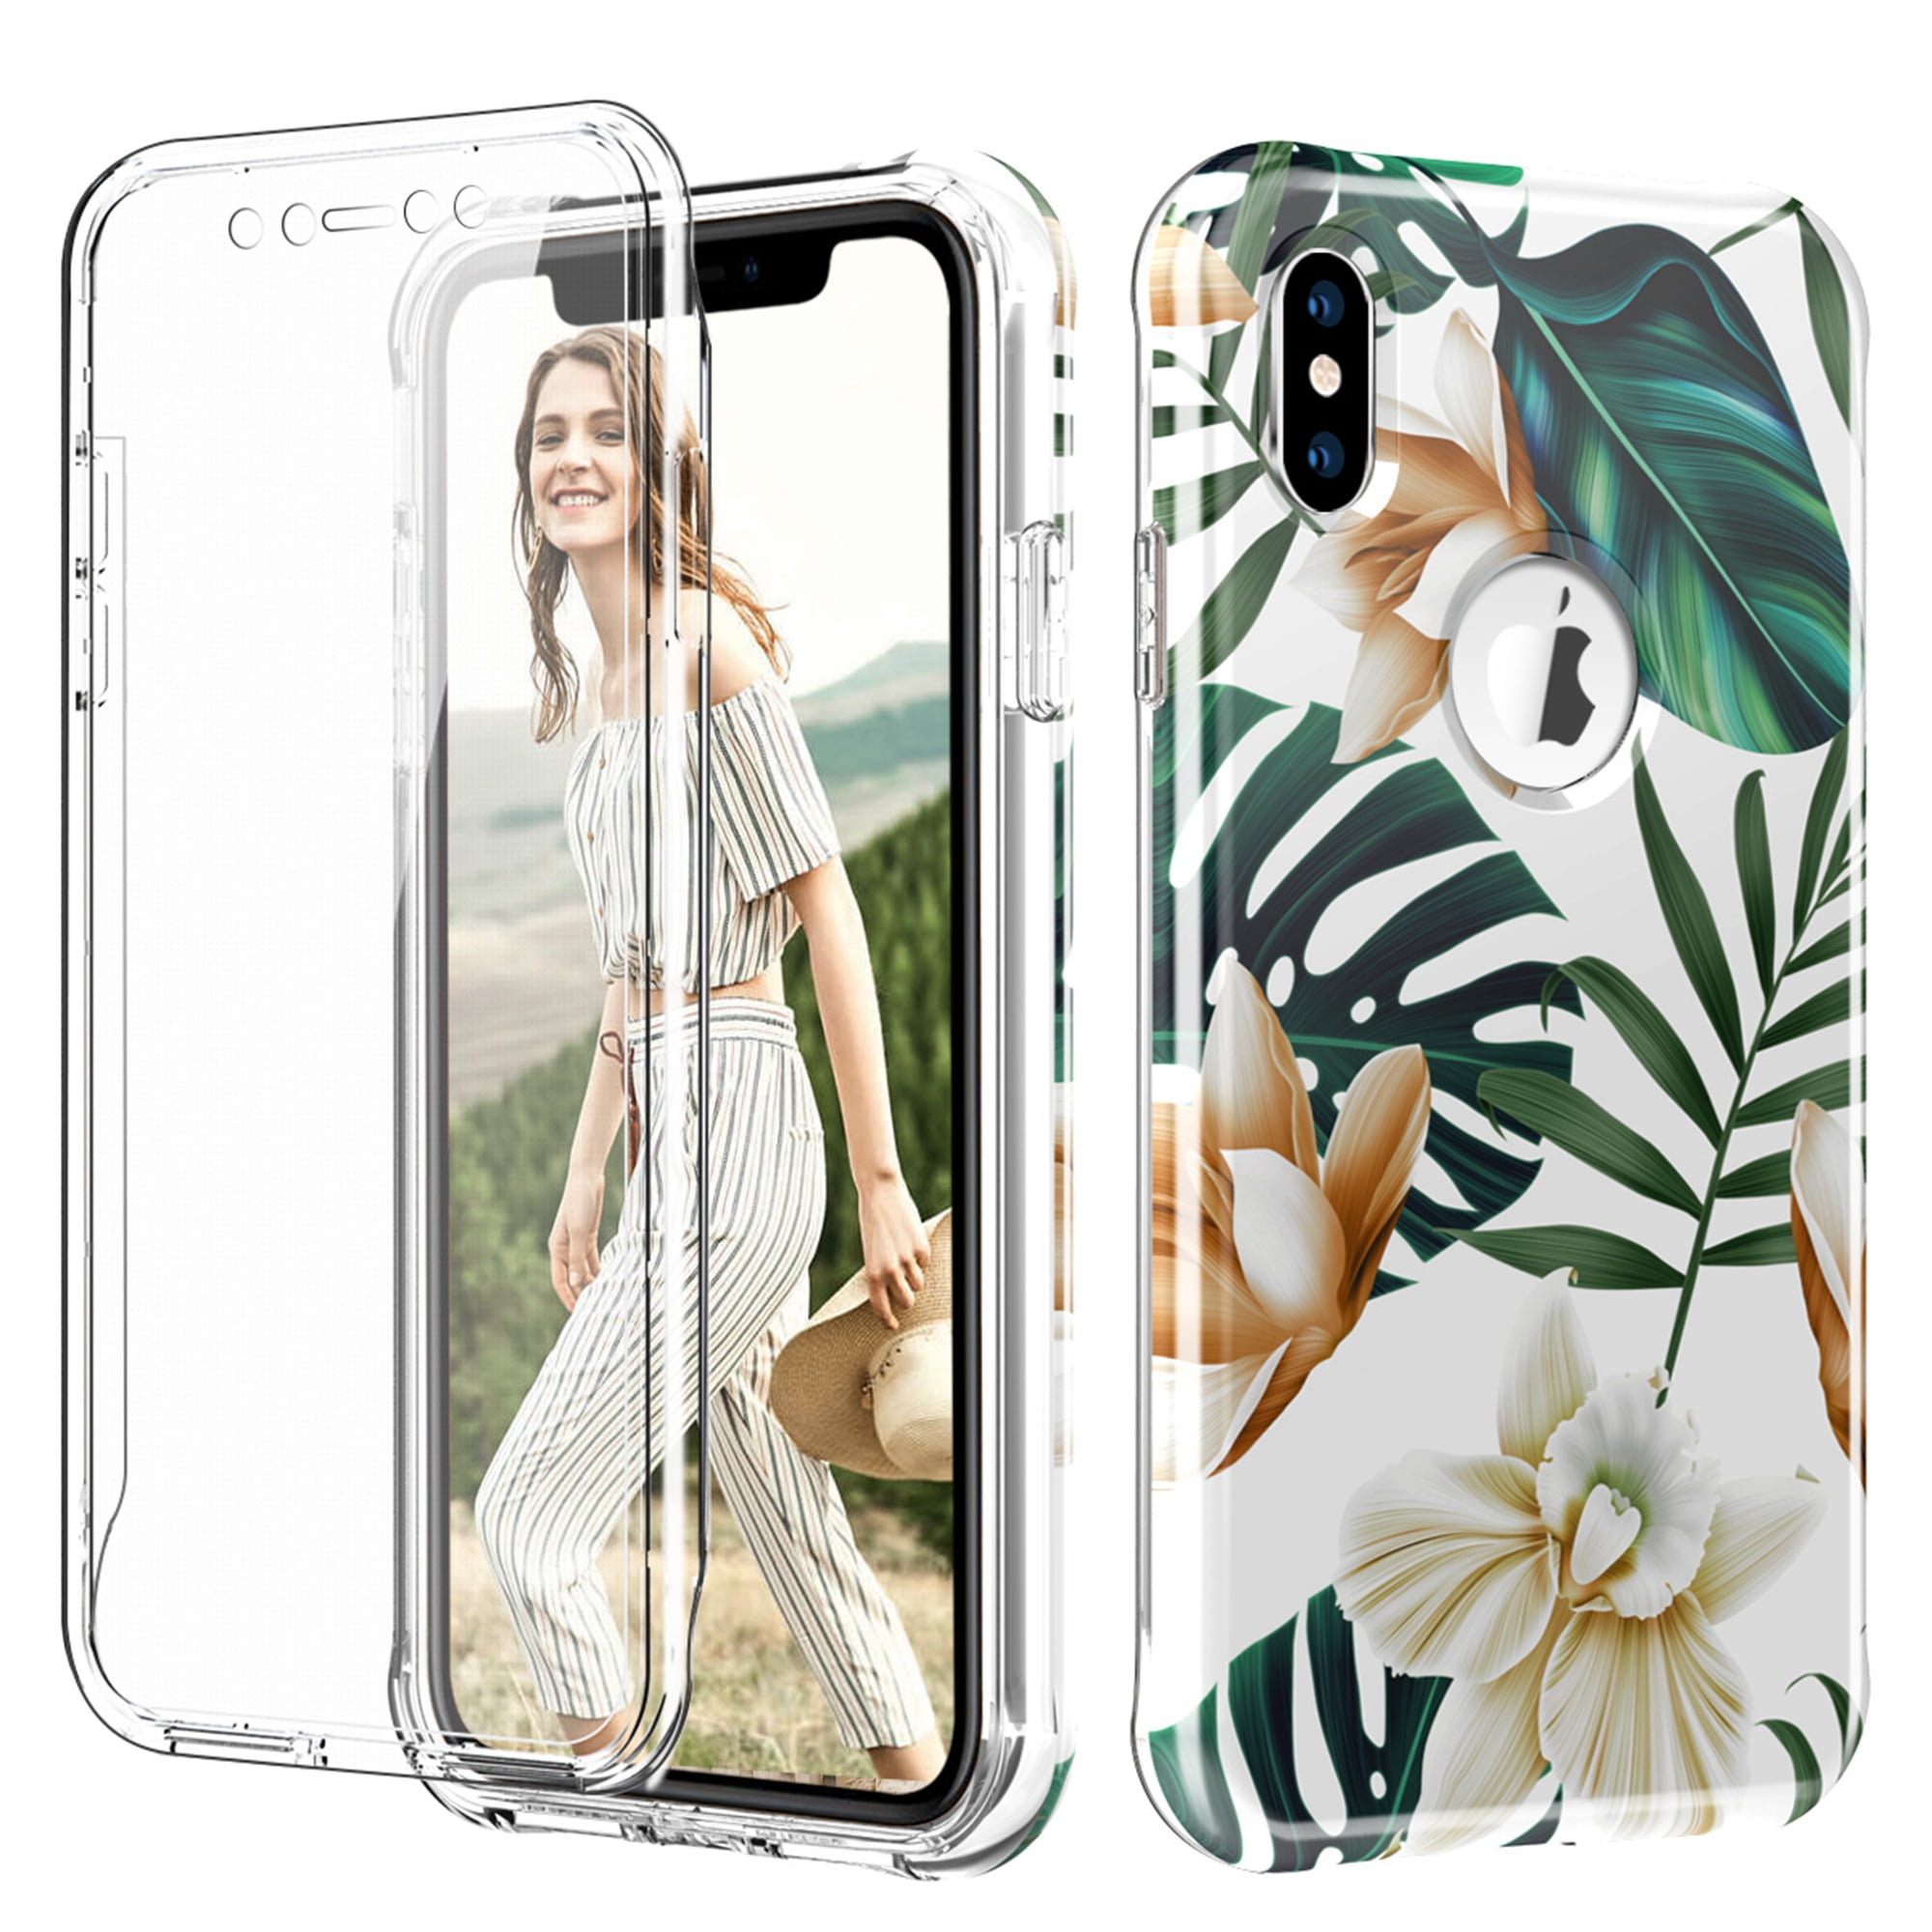 iPhone XS Max Case, Dteck body Protection Shockproof Hybrid Hard PC+Soft TPU Dual Layer Protective Case Built-in Screen Cover For Apple iPhone XS Max 6.5 inch, White Flower Walmart.com